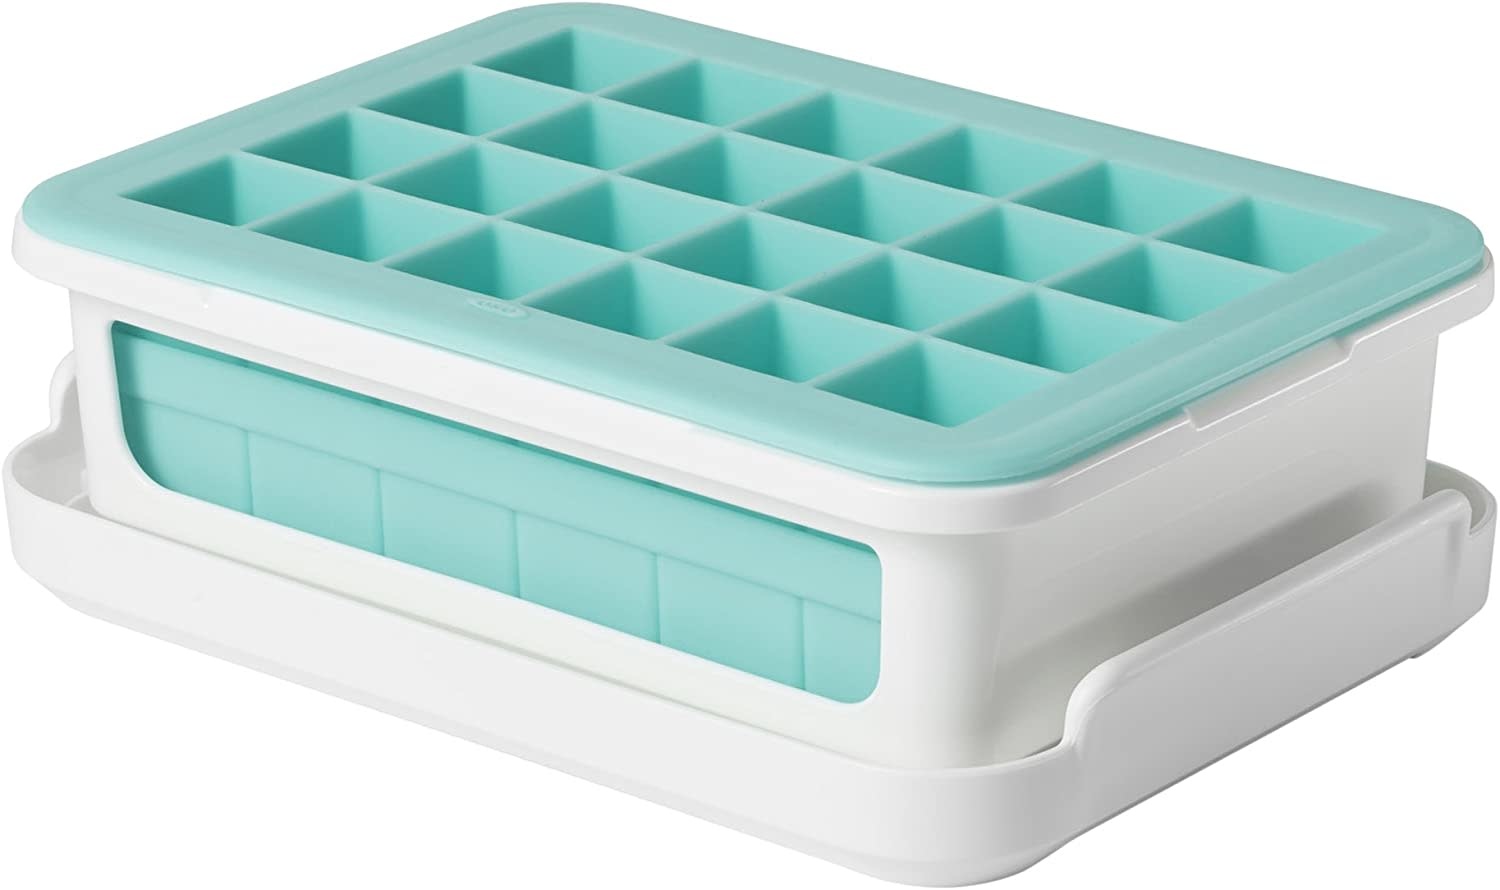 OXO Good Grips Large Silicone Ice Cube Tray